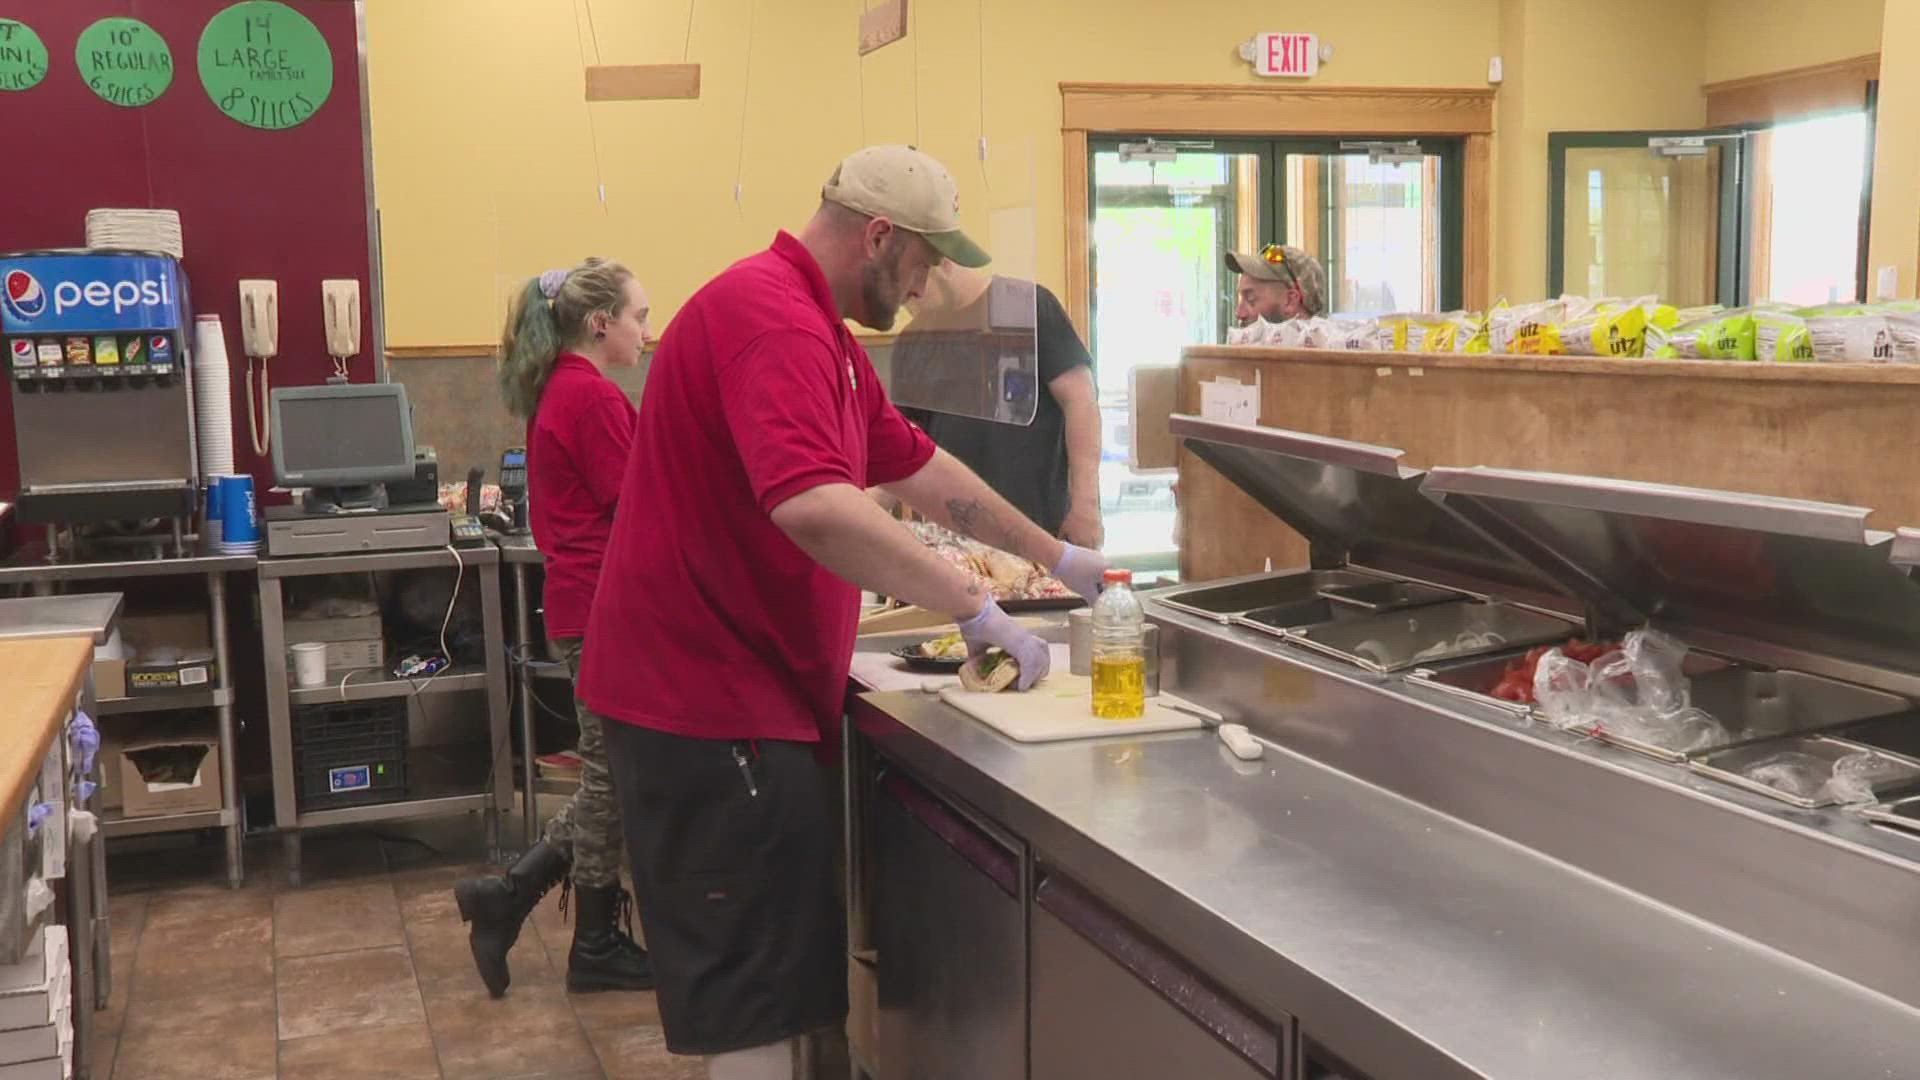 Sam's Italian Foods was purchased earlier this year by the national company Teamshares, which helps businesses with retiring owners become employee owned.